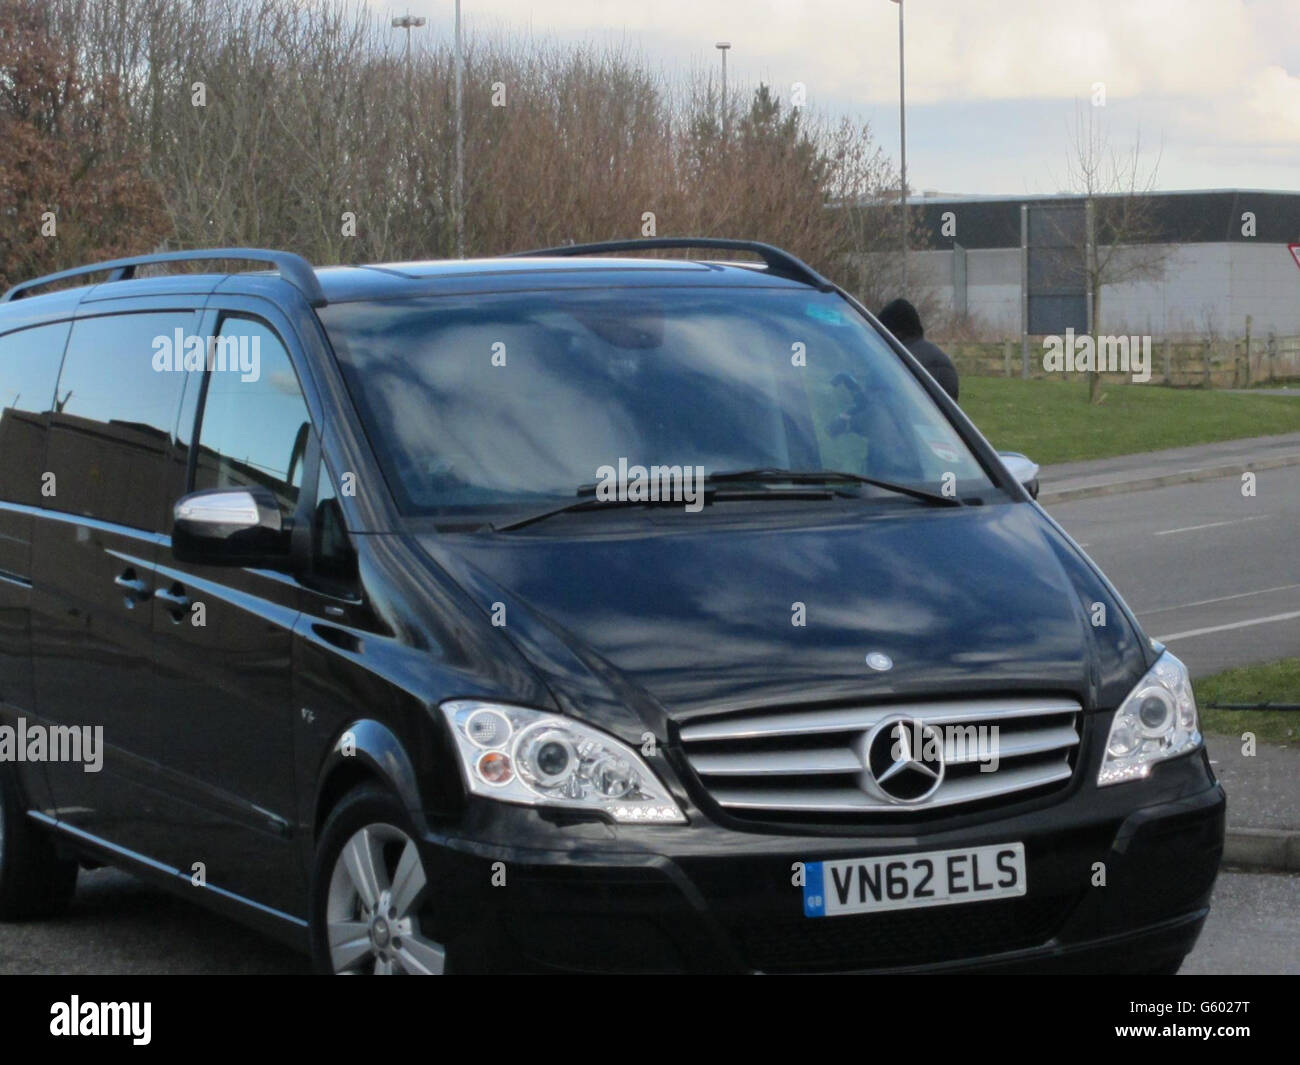 The vehicle carrying Manchester City footballer Carlos Tevez arrives at Cheshire Constabulary Custody Suite in Middlewich as he has been charged with driving while disqualified and driving without insurance, Cheshire Police said. Stock Photo